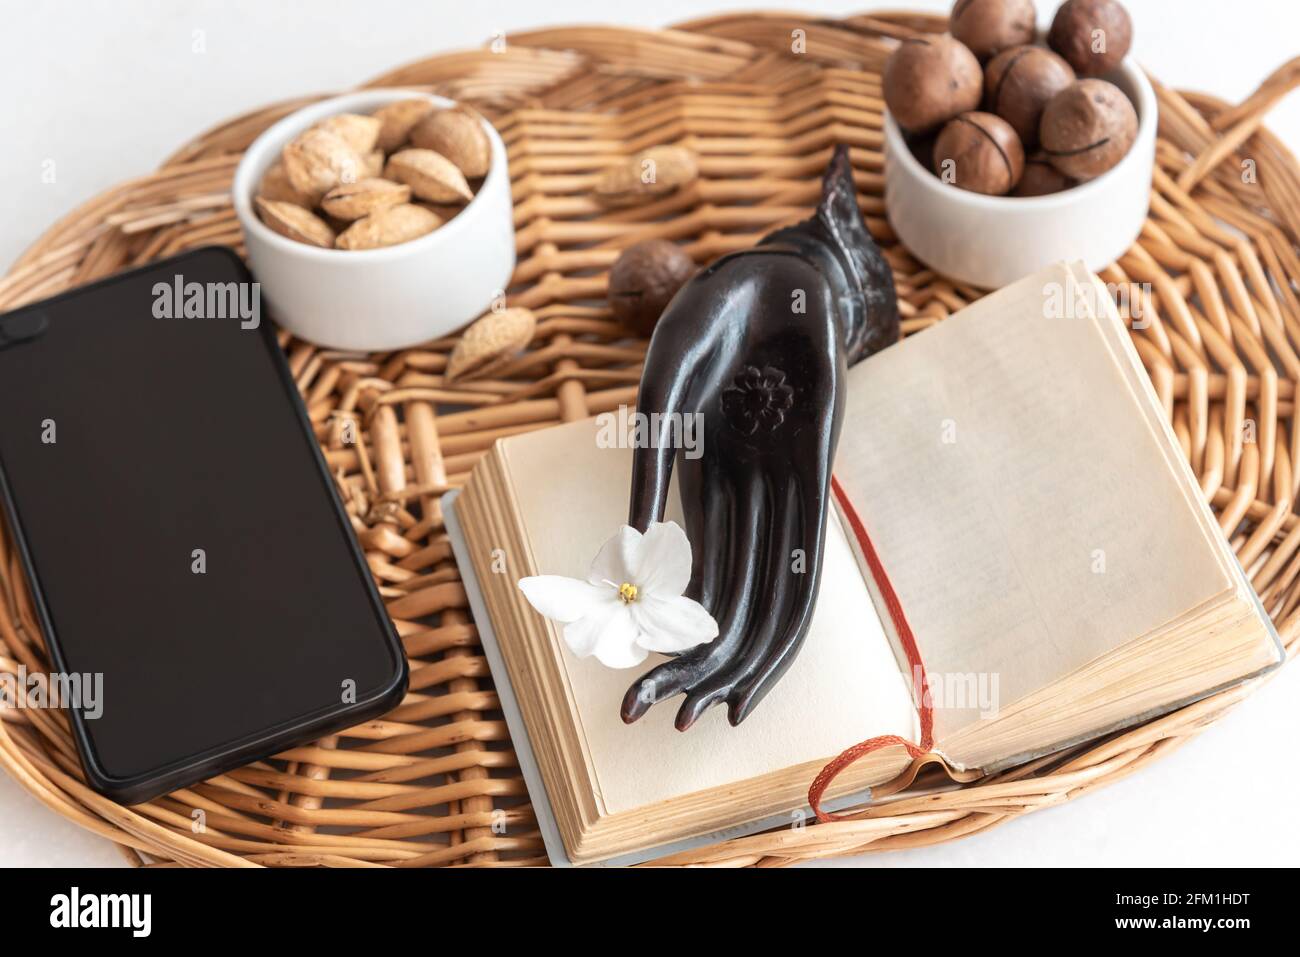 A open book or notebook, smartphone and a snack of nuts on a table in a wicker tray. Stock Photo